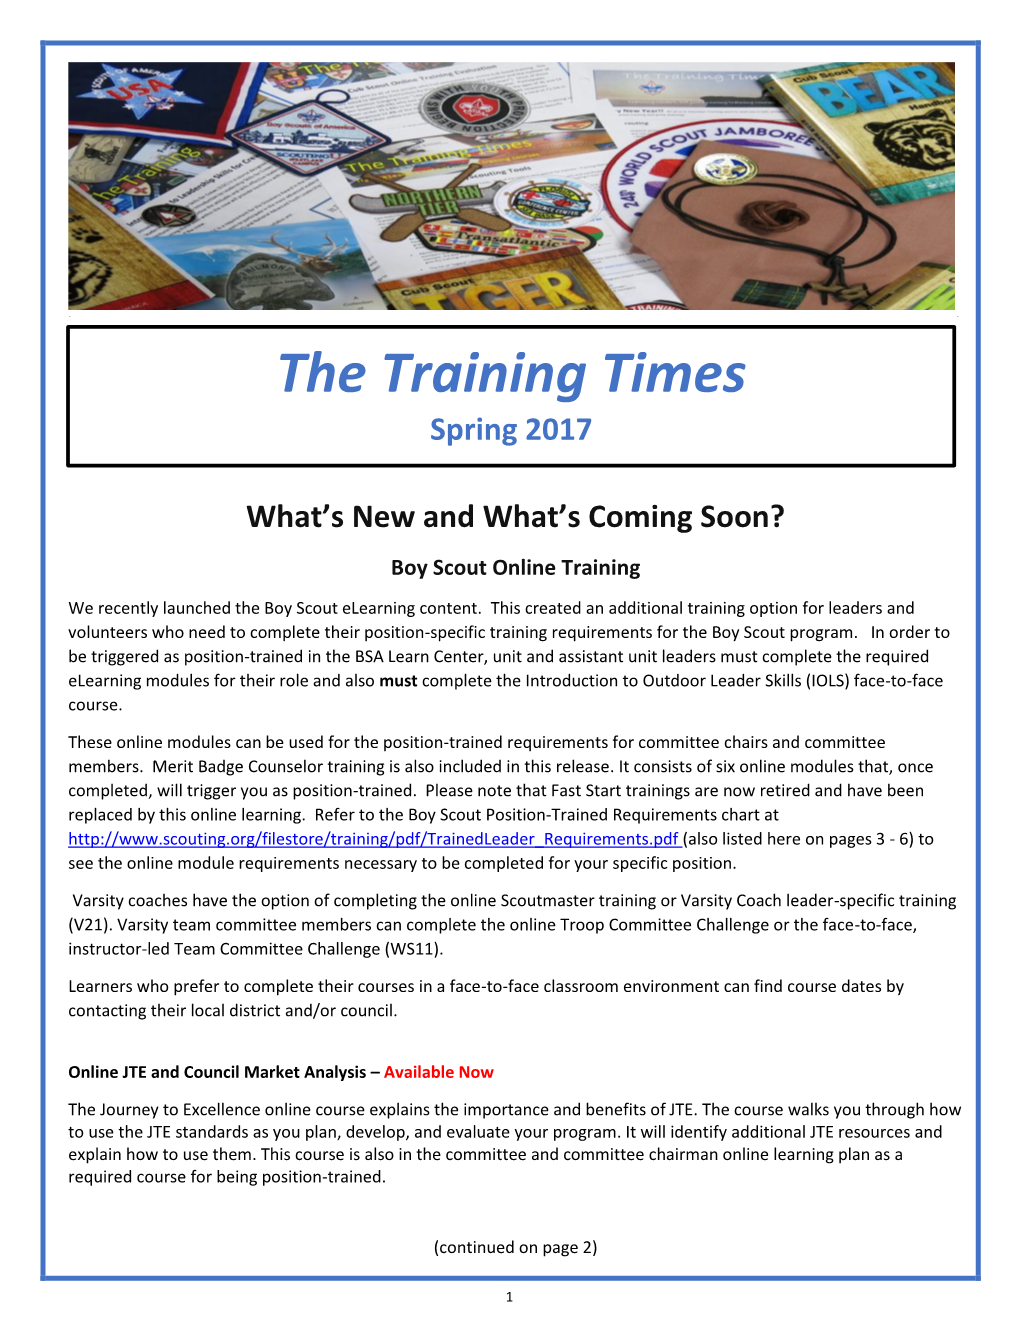 The Training Times Spring 2017